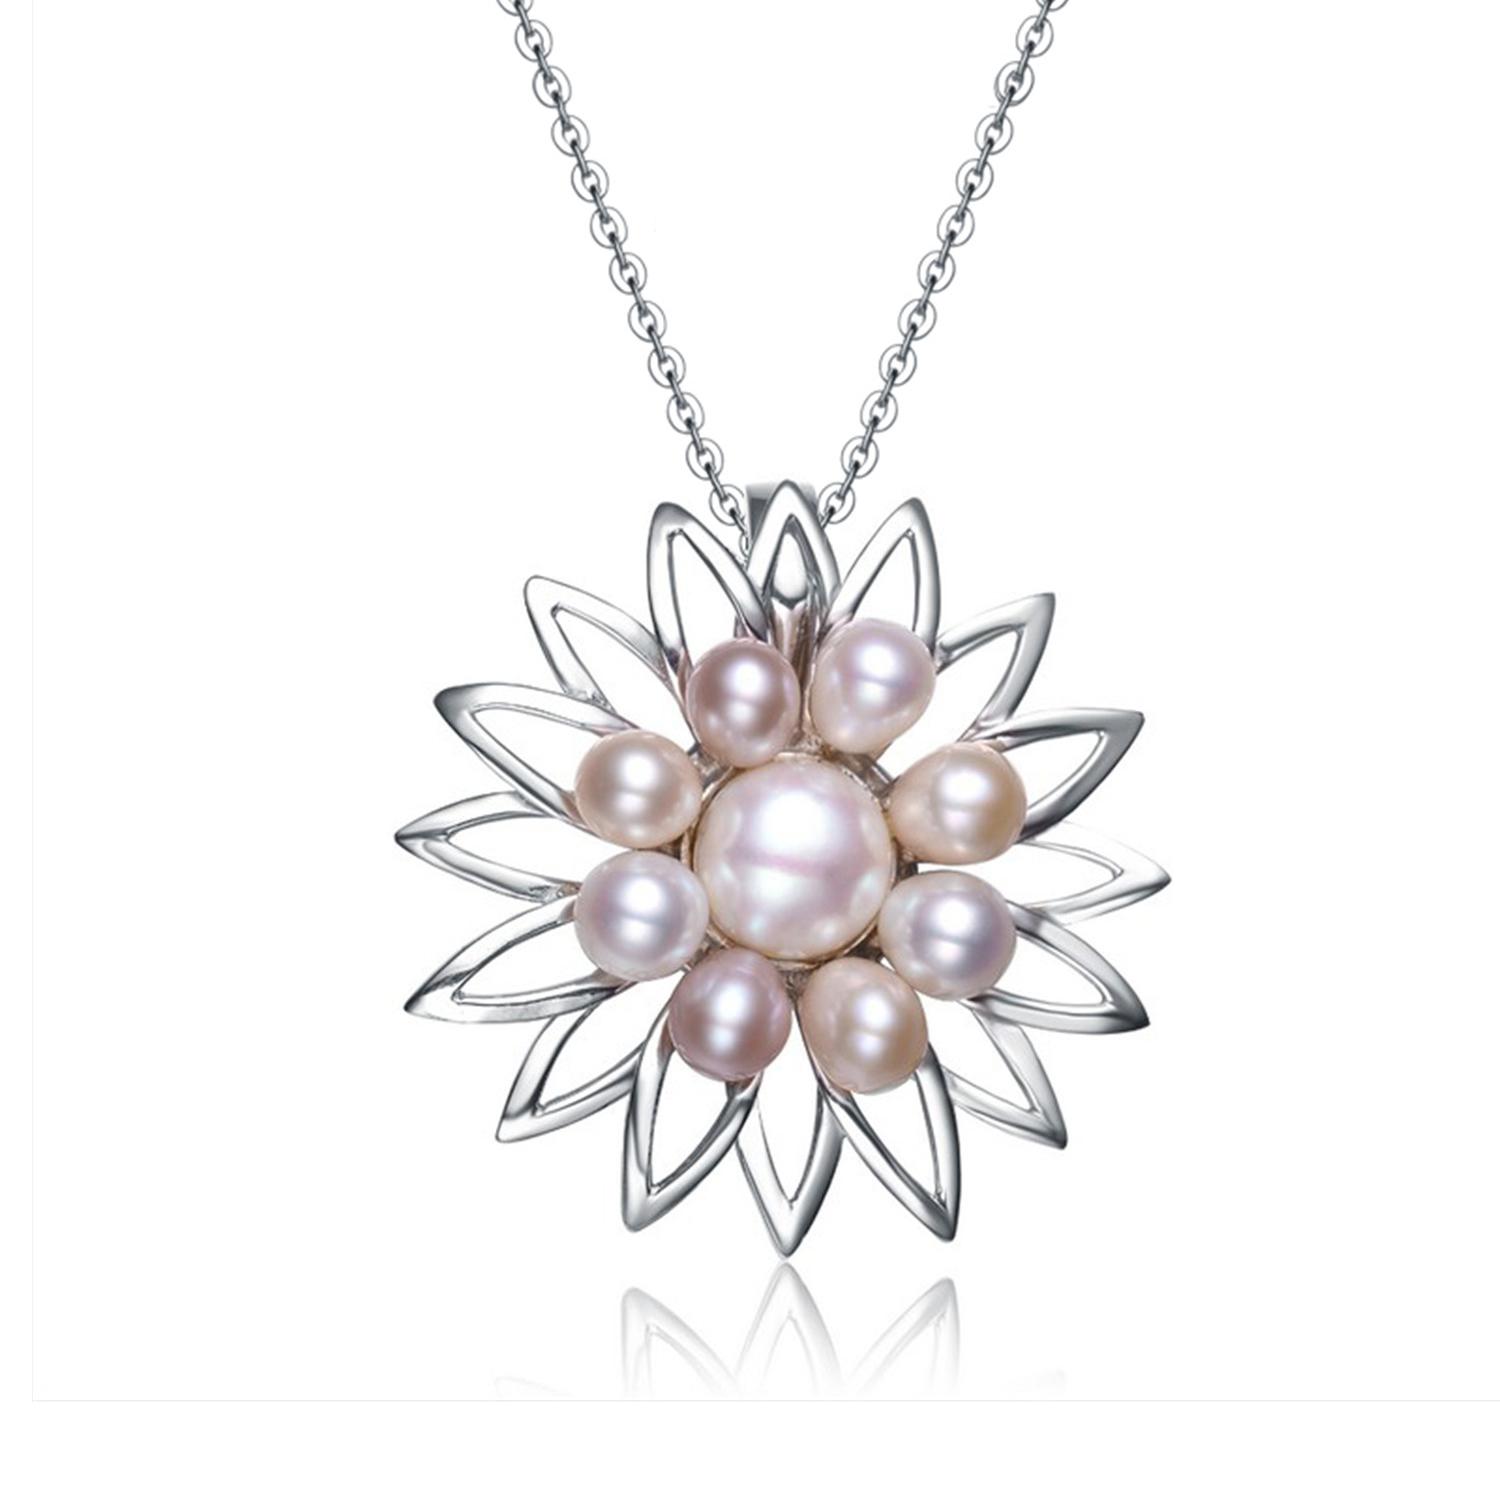 High quality elegant necklace 925 sterling silver necklace flower pearl necklace pendant(图1)